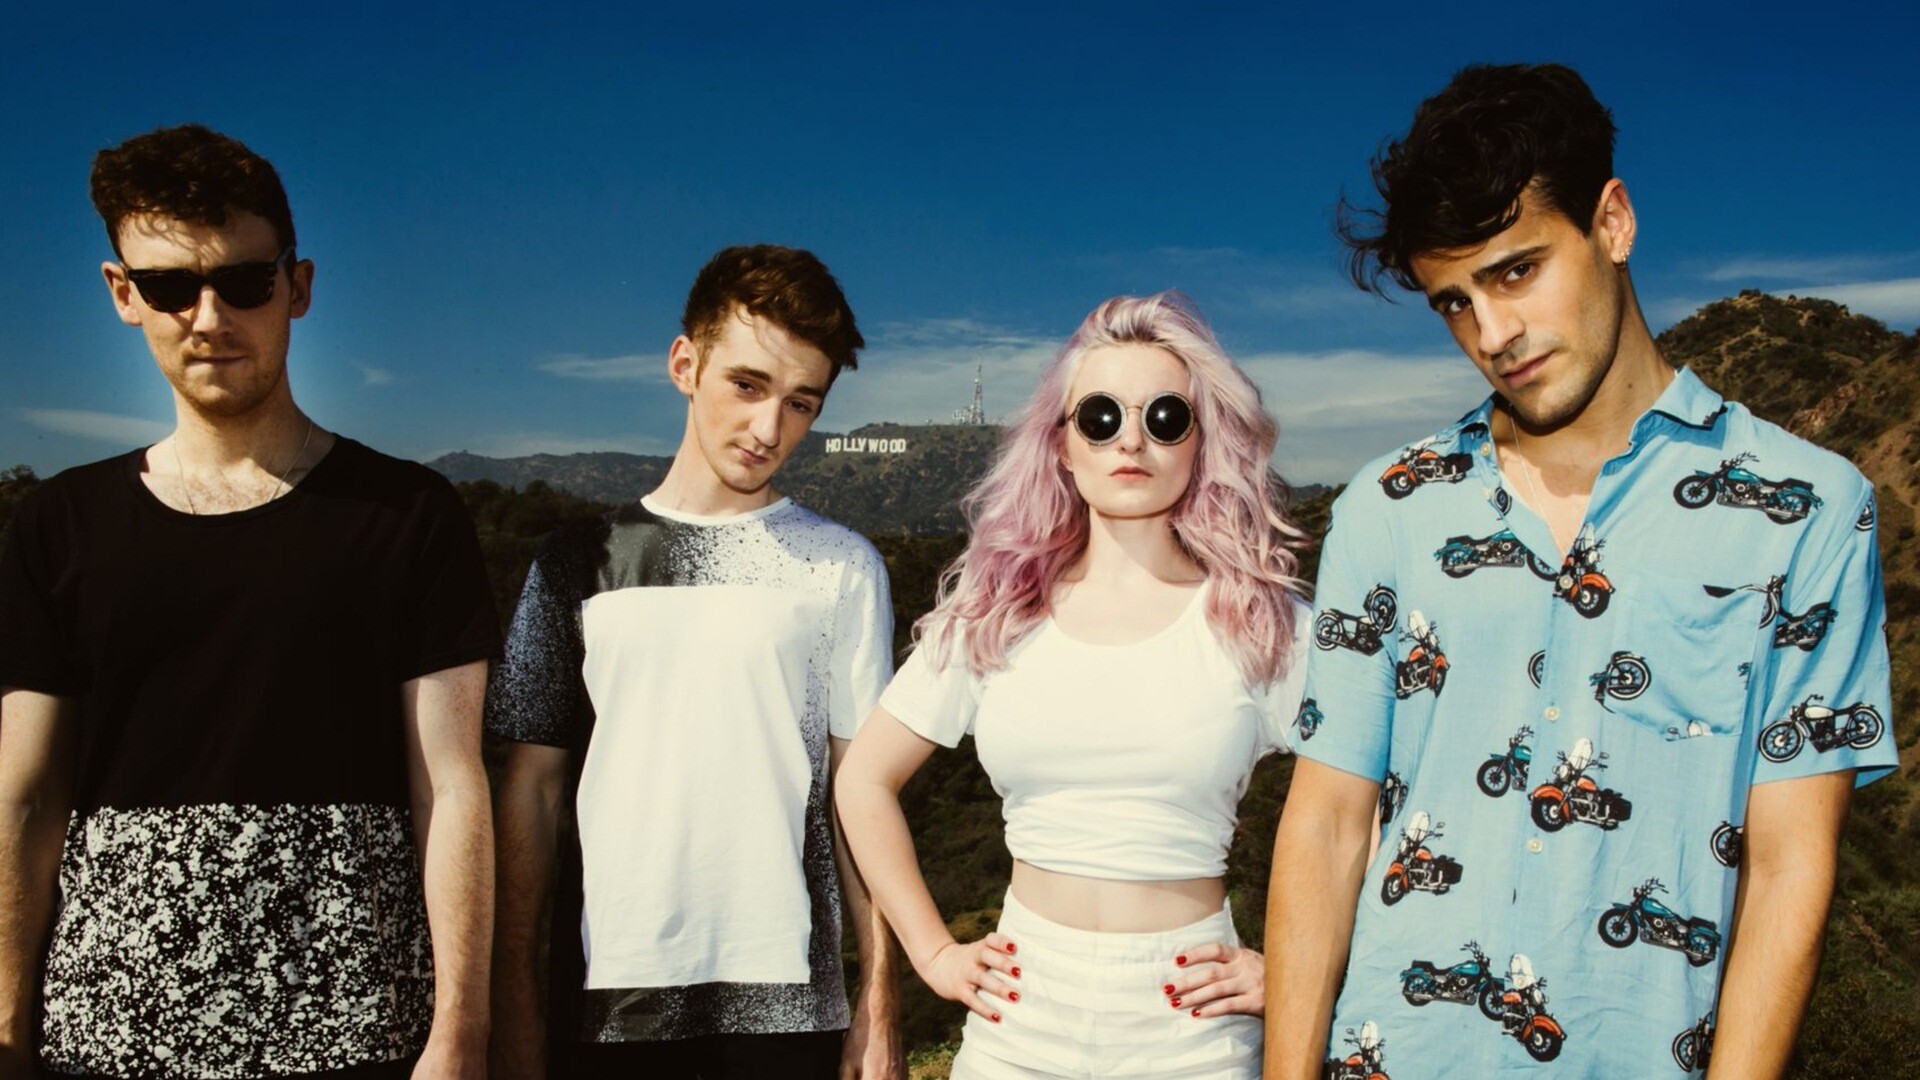 Clean Bandit, Background wallpapers, High quality, Aesthetic appeal, 1920x1080 Full HD Desktop